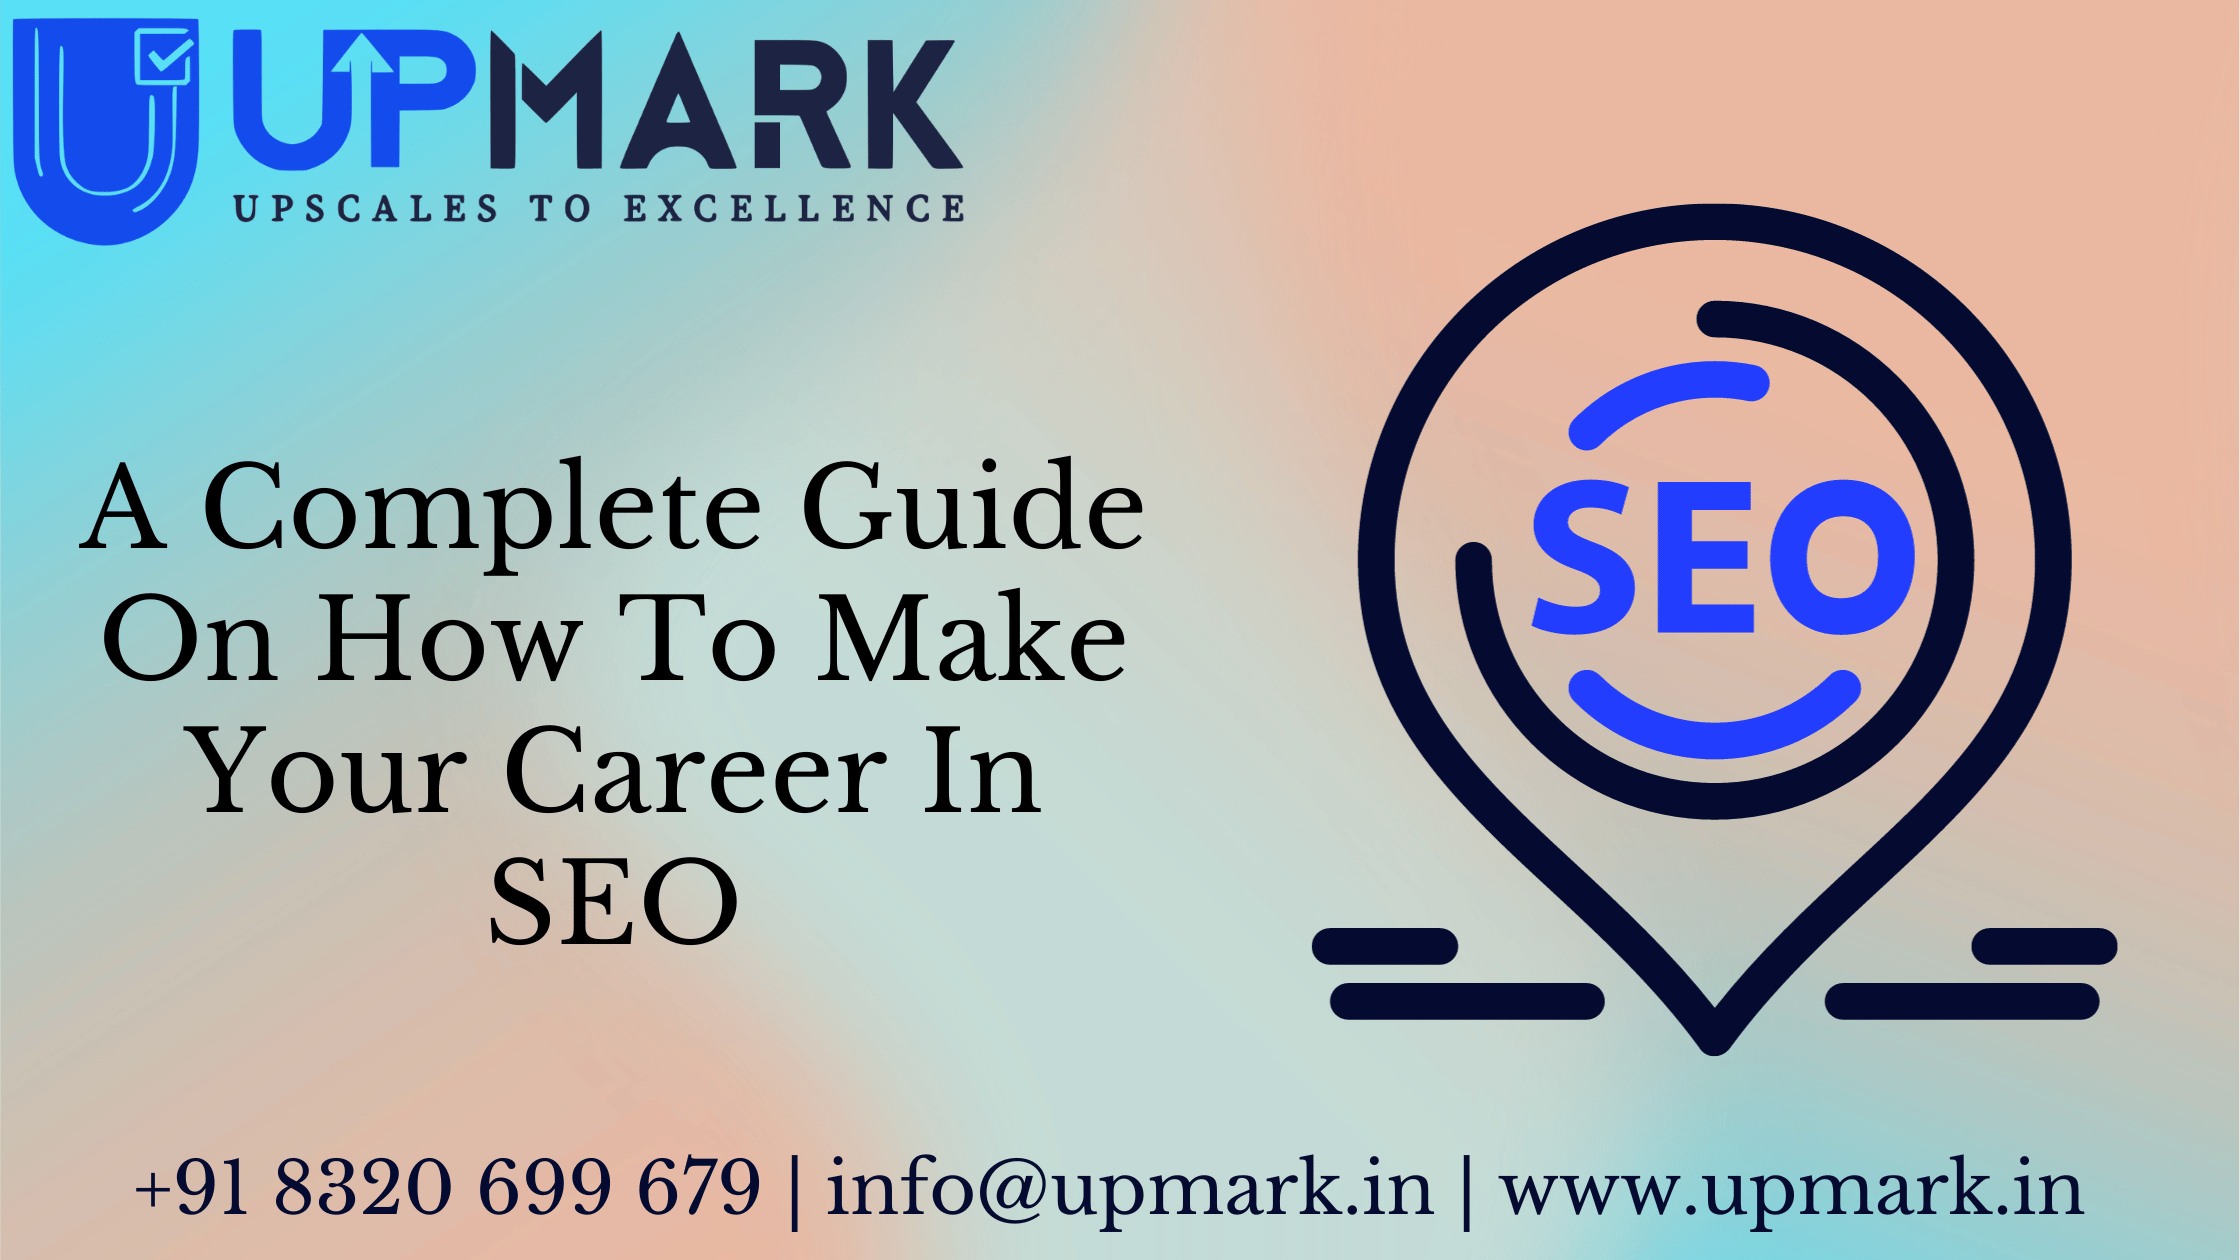 A Complete Guide On How To Make Your Career In SEO